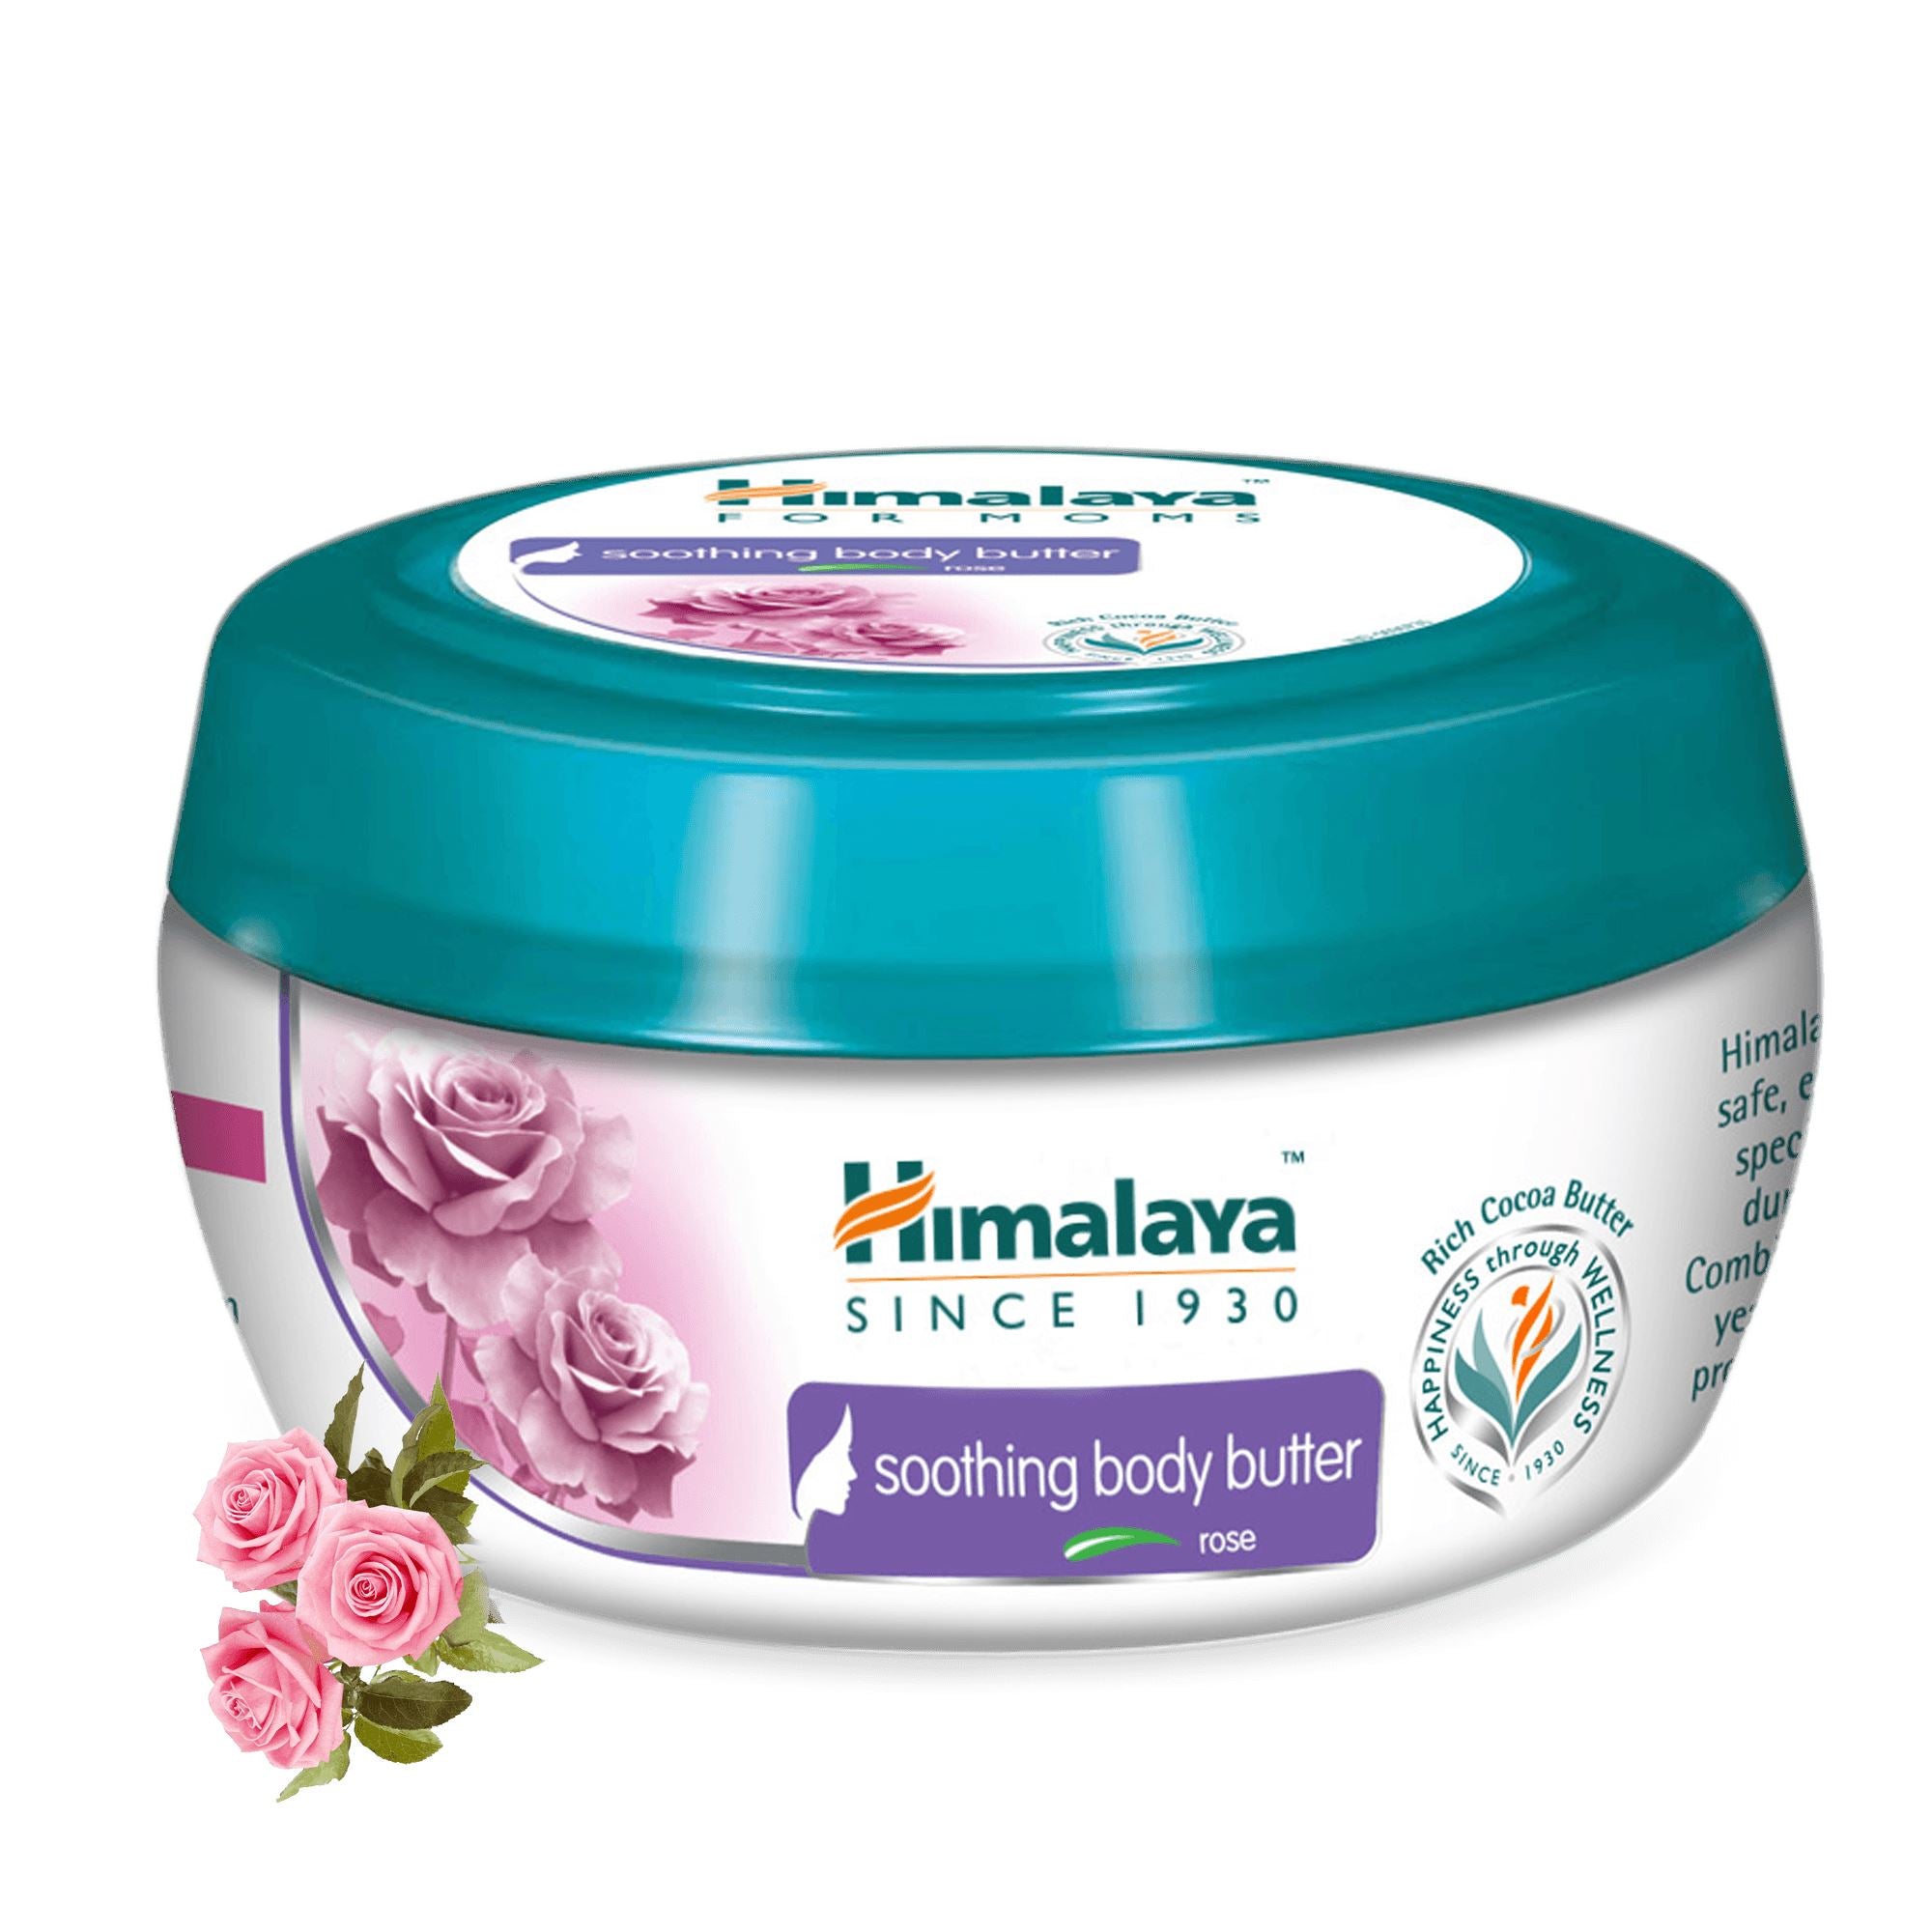 Himalaya soothing body butter cream Rose 200ml- Soothes and nourishes skin